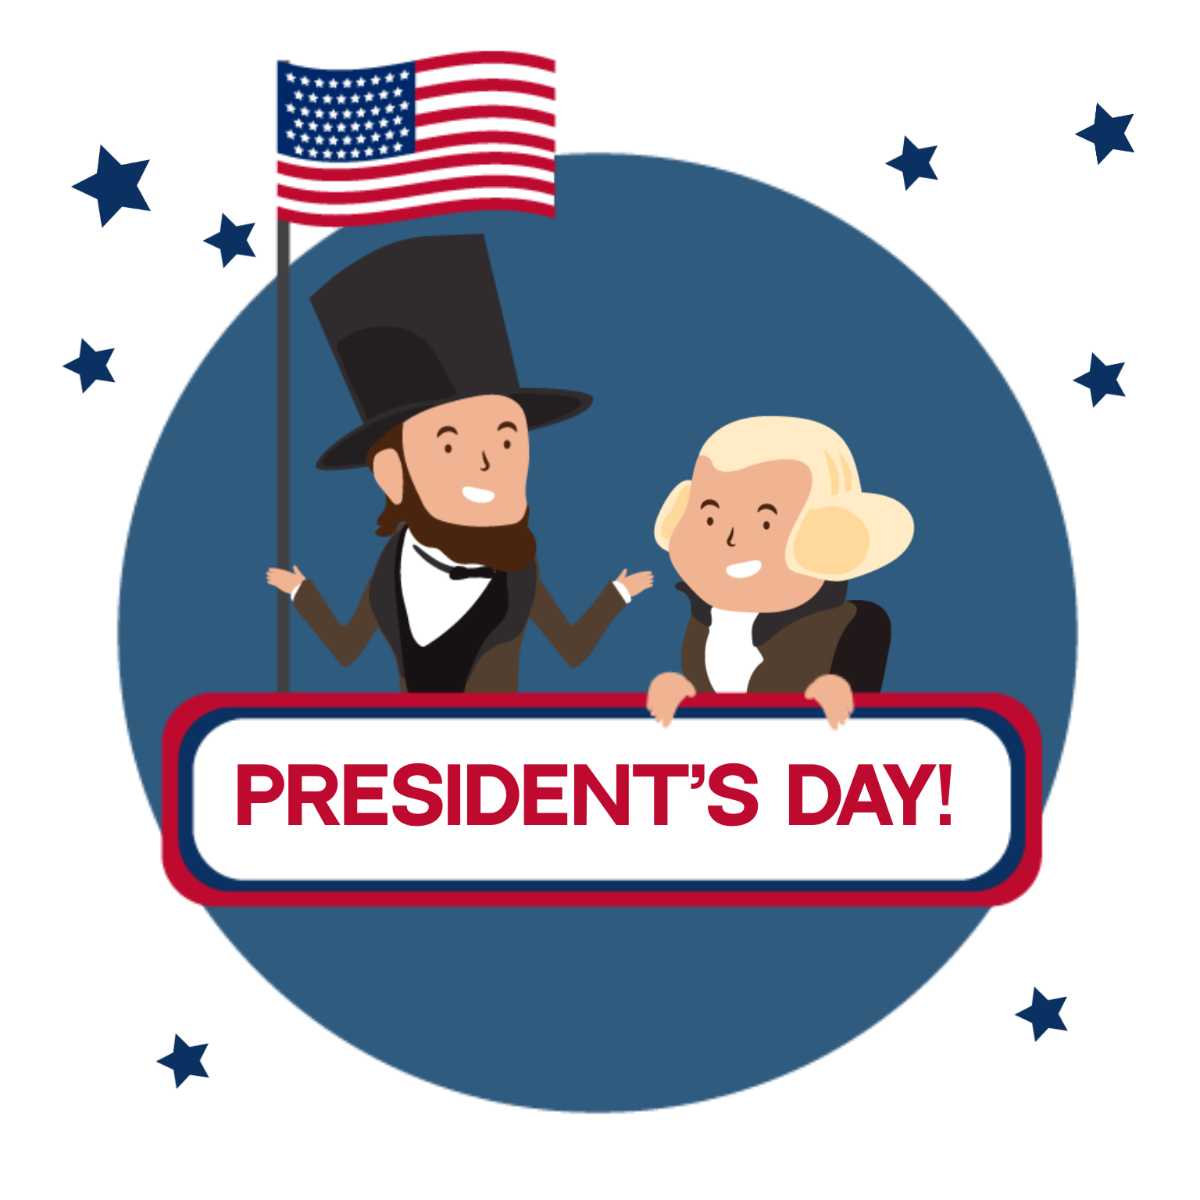 Presidents' Day Illustration Template